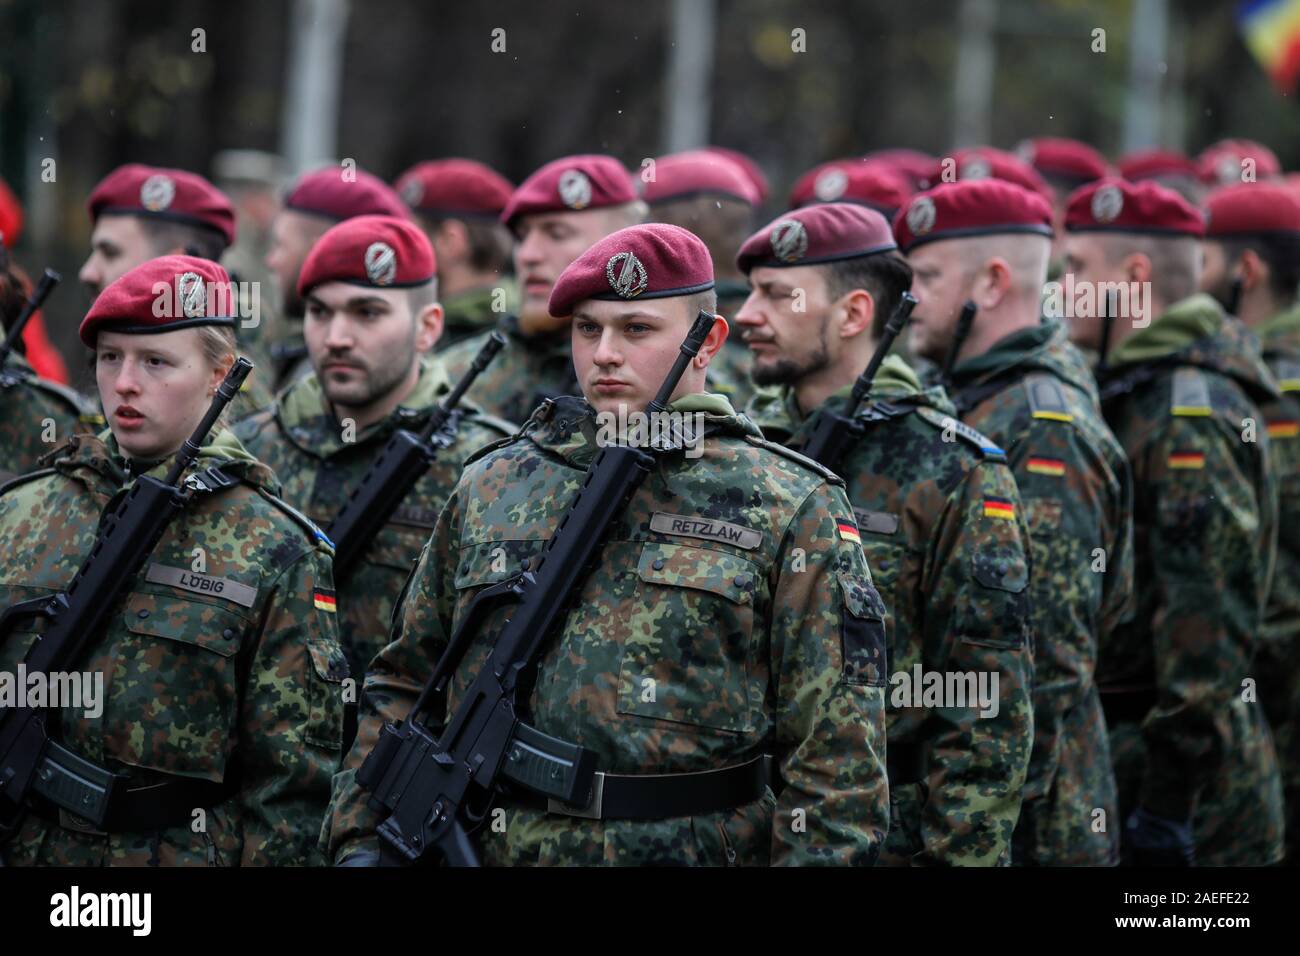 Bucharest, Romania - December 01, 2019: German soldiers take part at the Romanian National Day military parade. Stock Photo